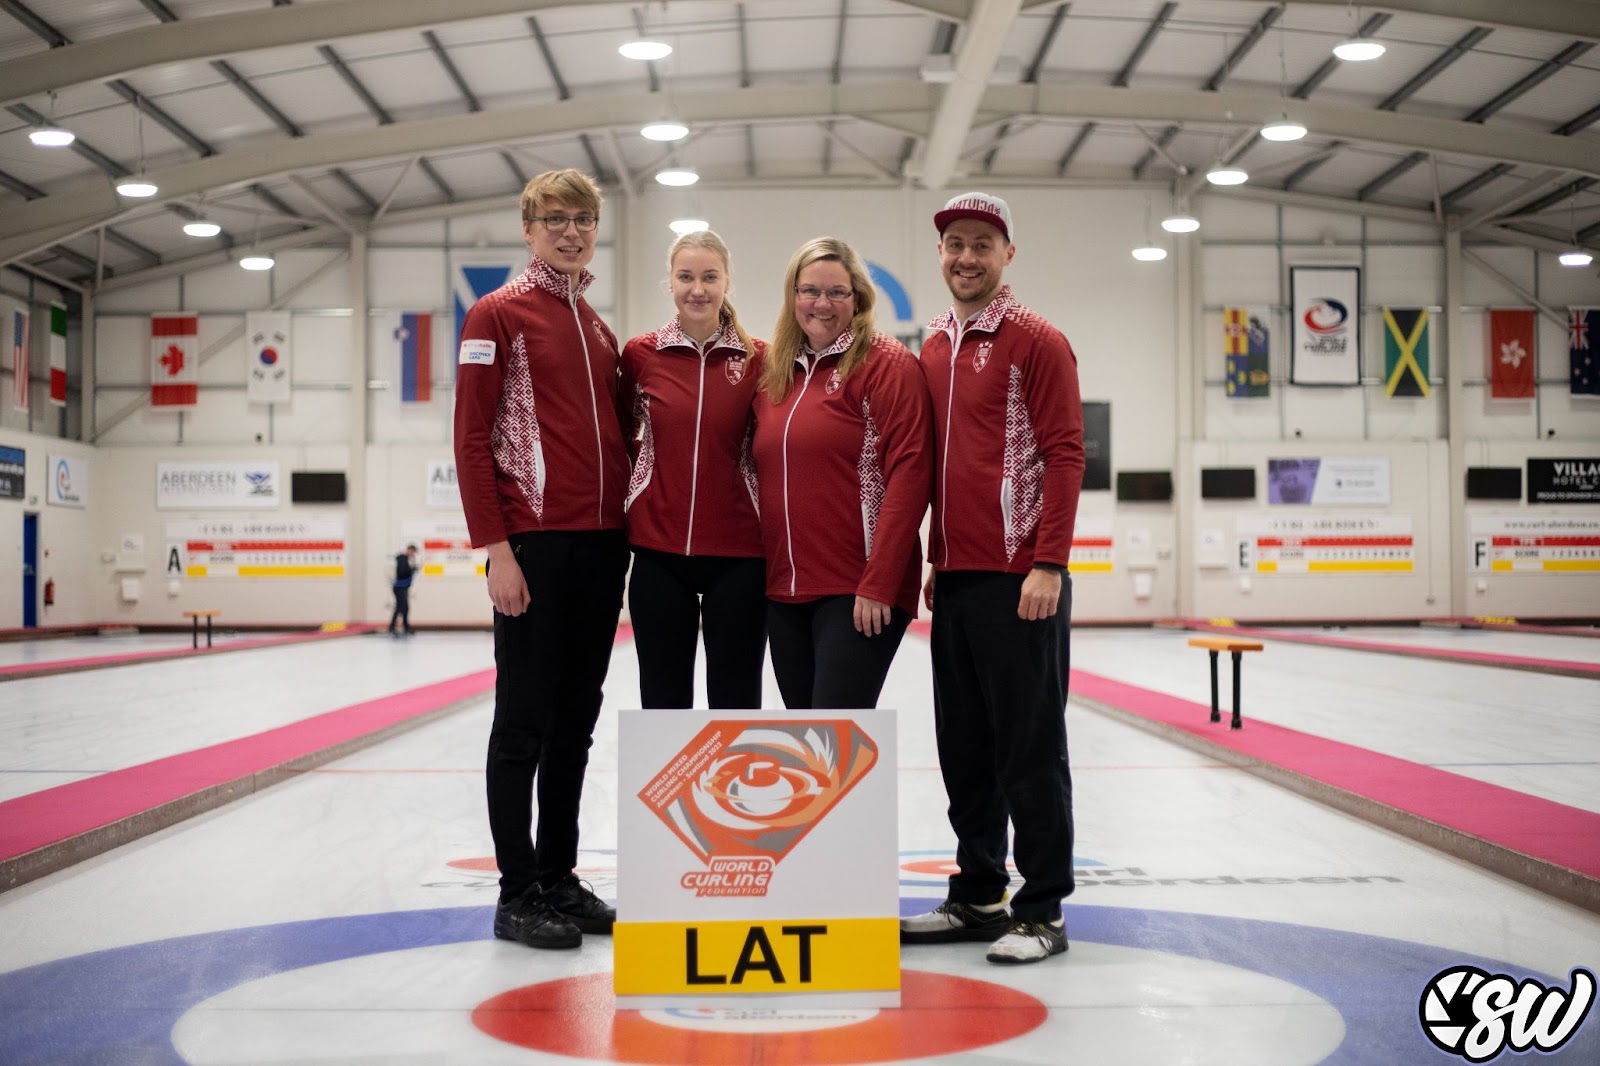 DiscoverCars-Sponsored Latvian National Curling Team Competed in the World Mixed Curling Championship